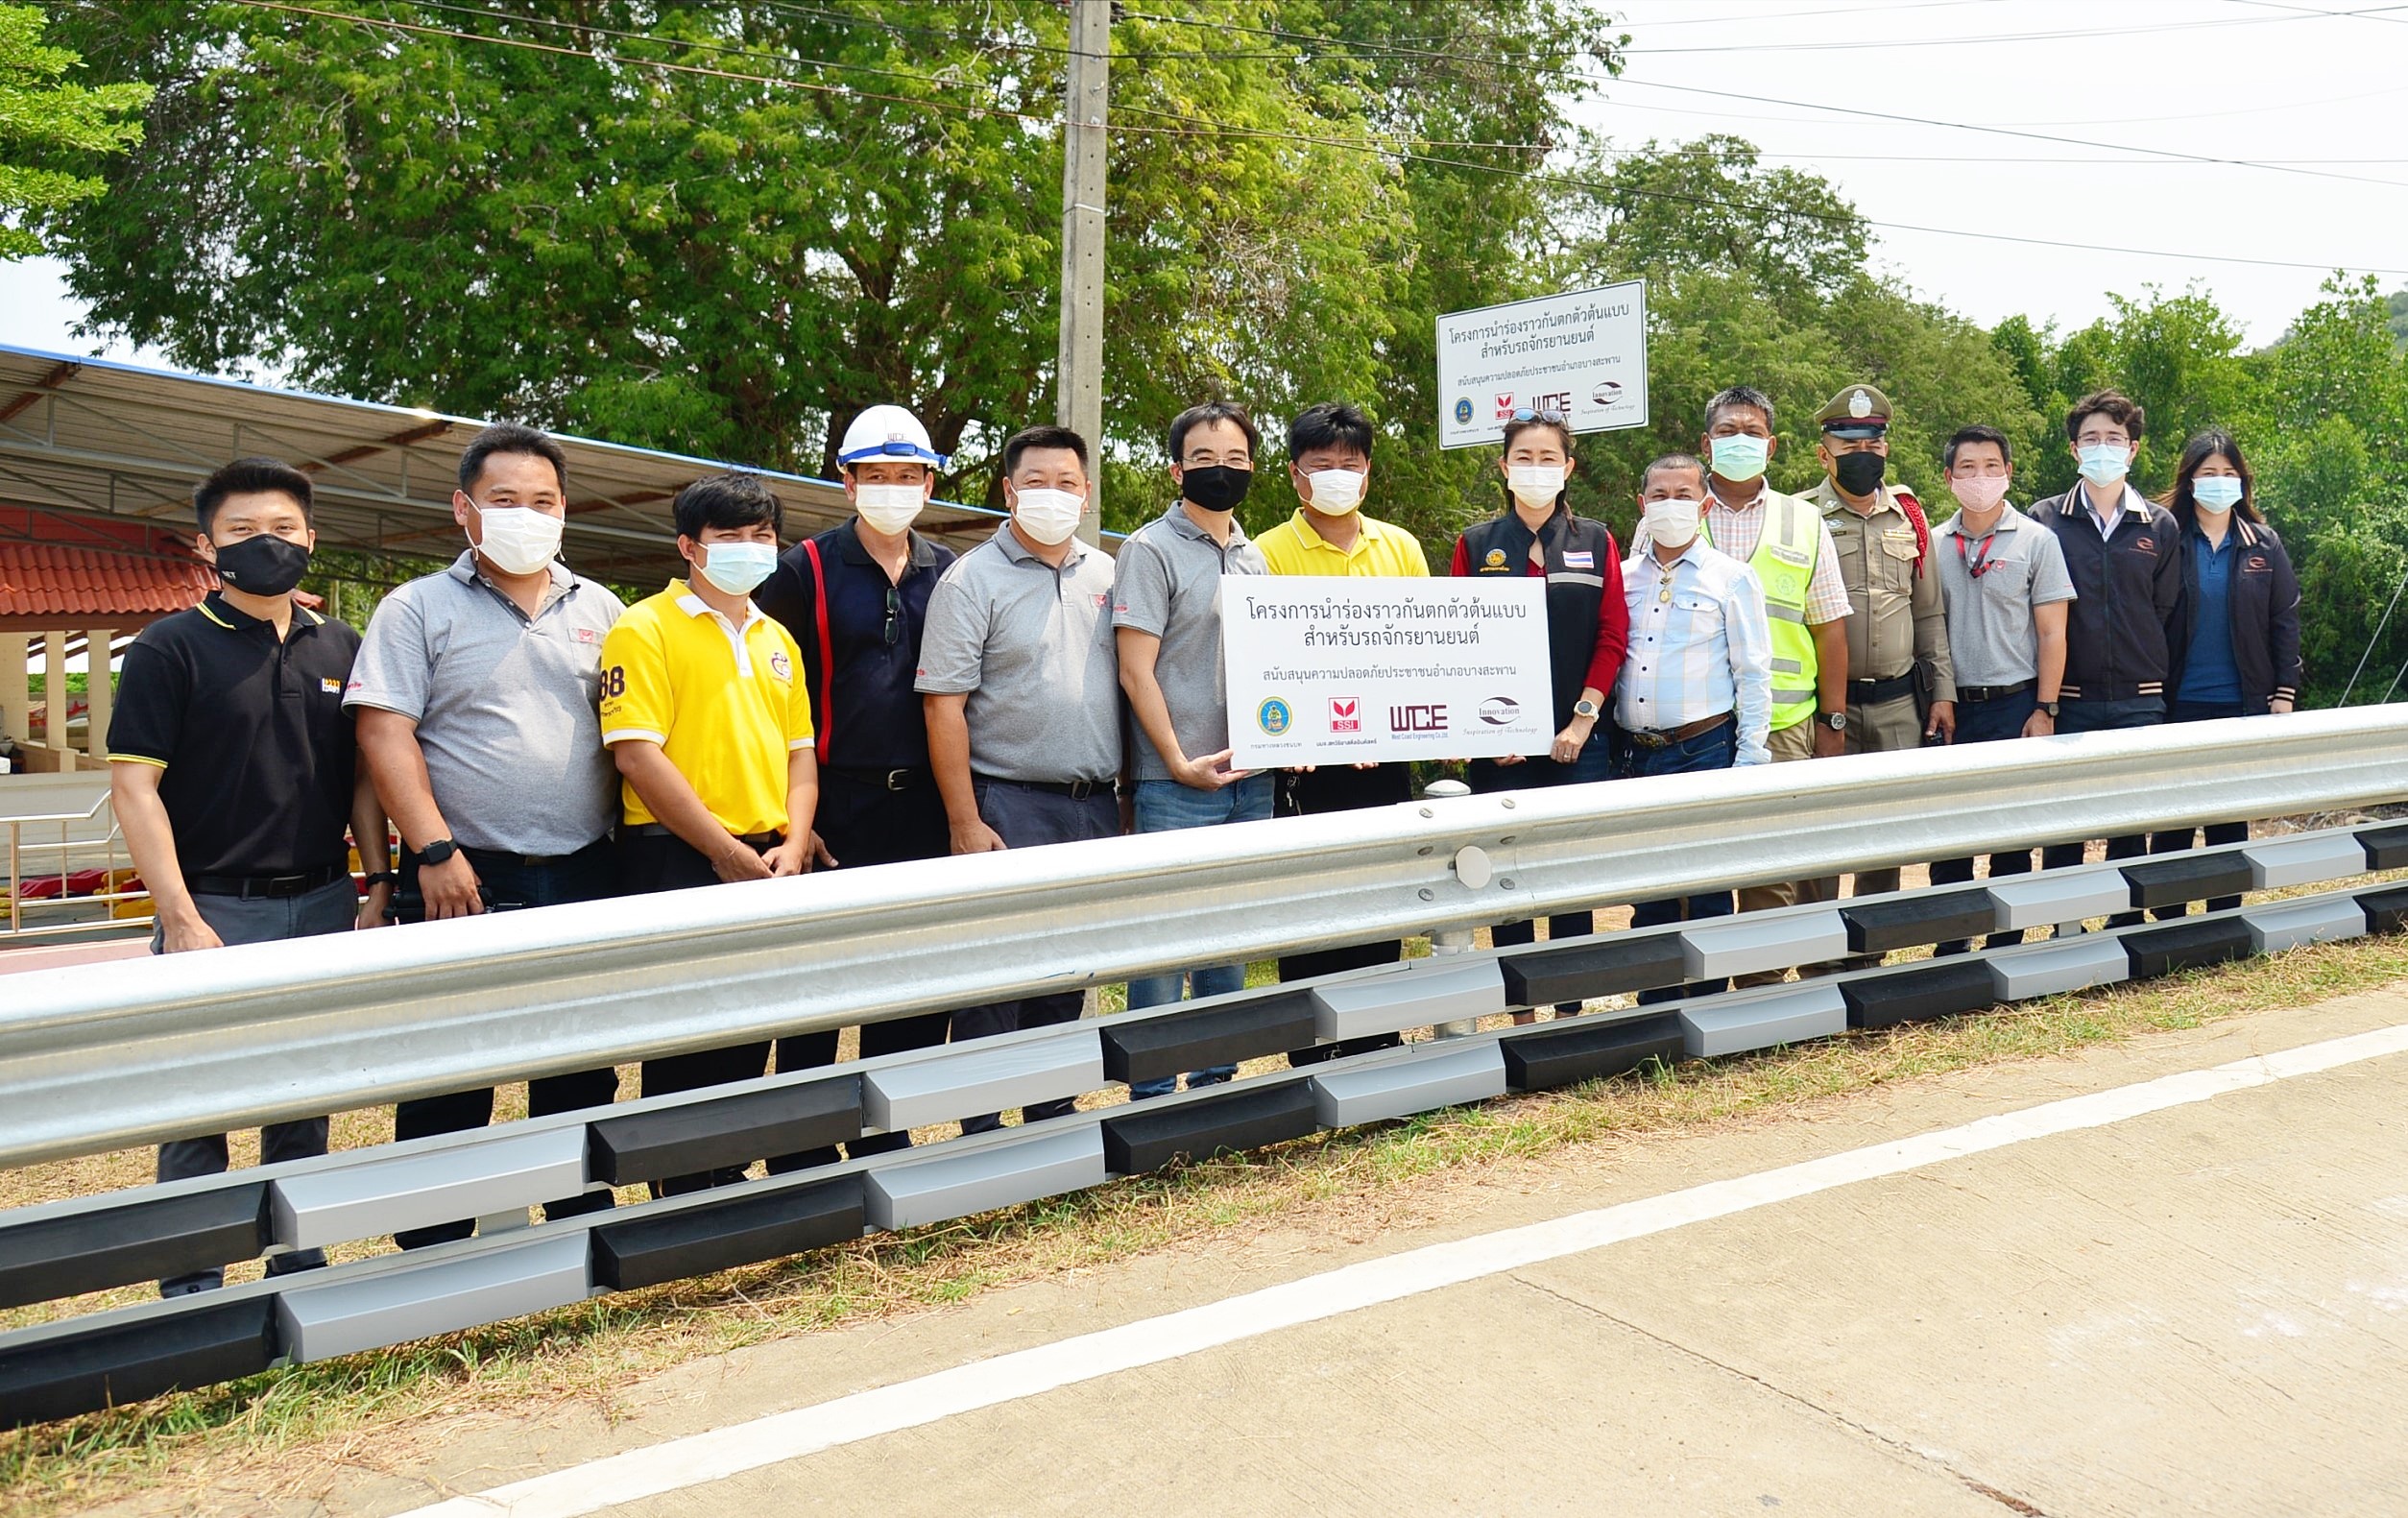 Motorcycle guardrail pilot project, Steel Innovation for Safety of Bangsaphan Community